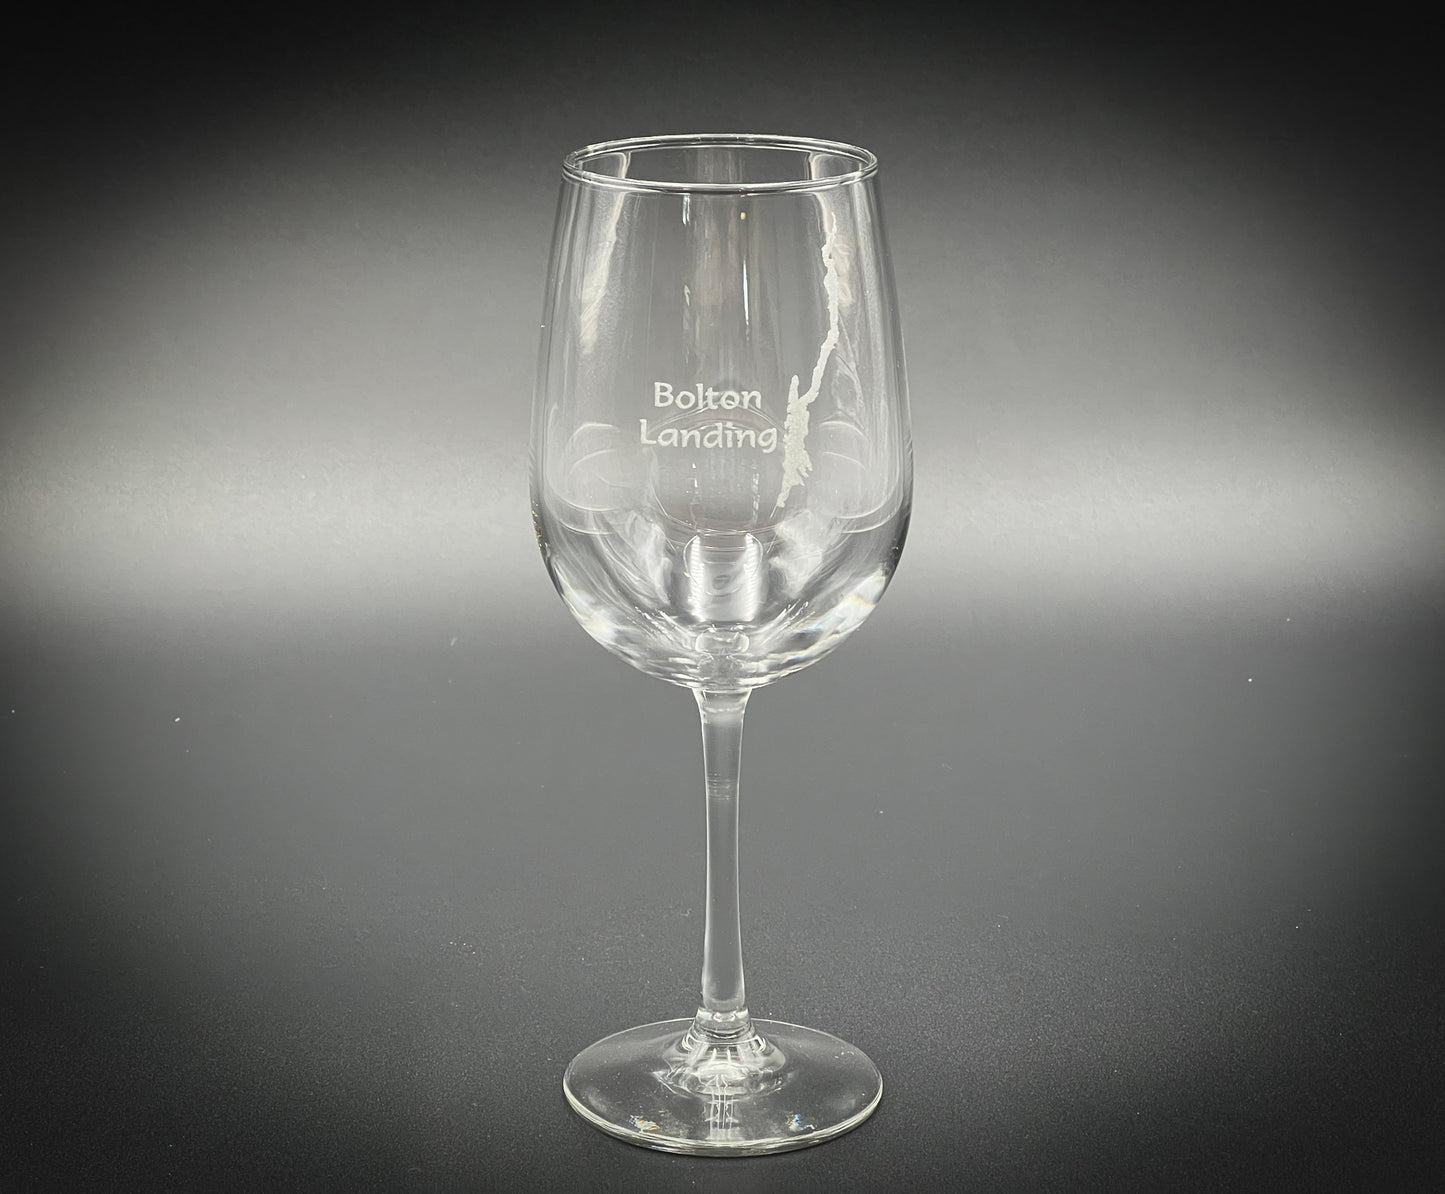 Lake George with Bolton Landing - 18.5 oz Stemmed Wine Glass